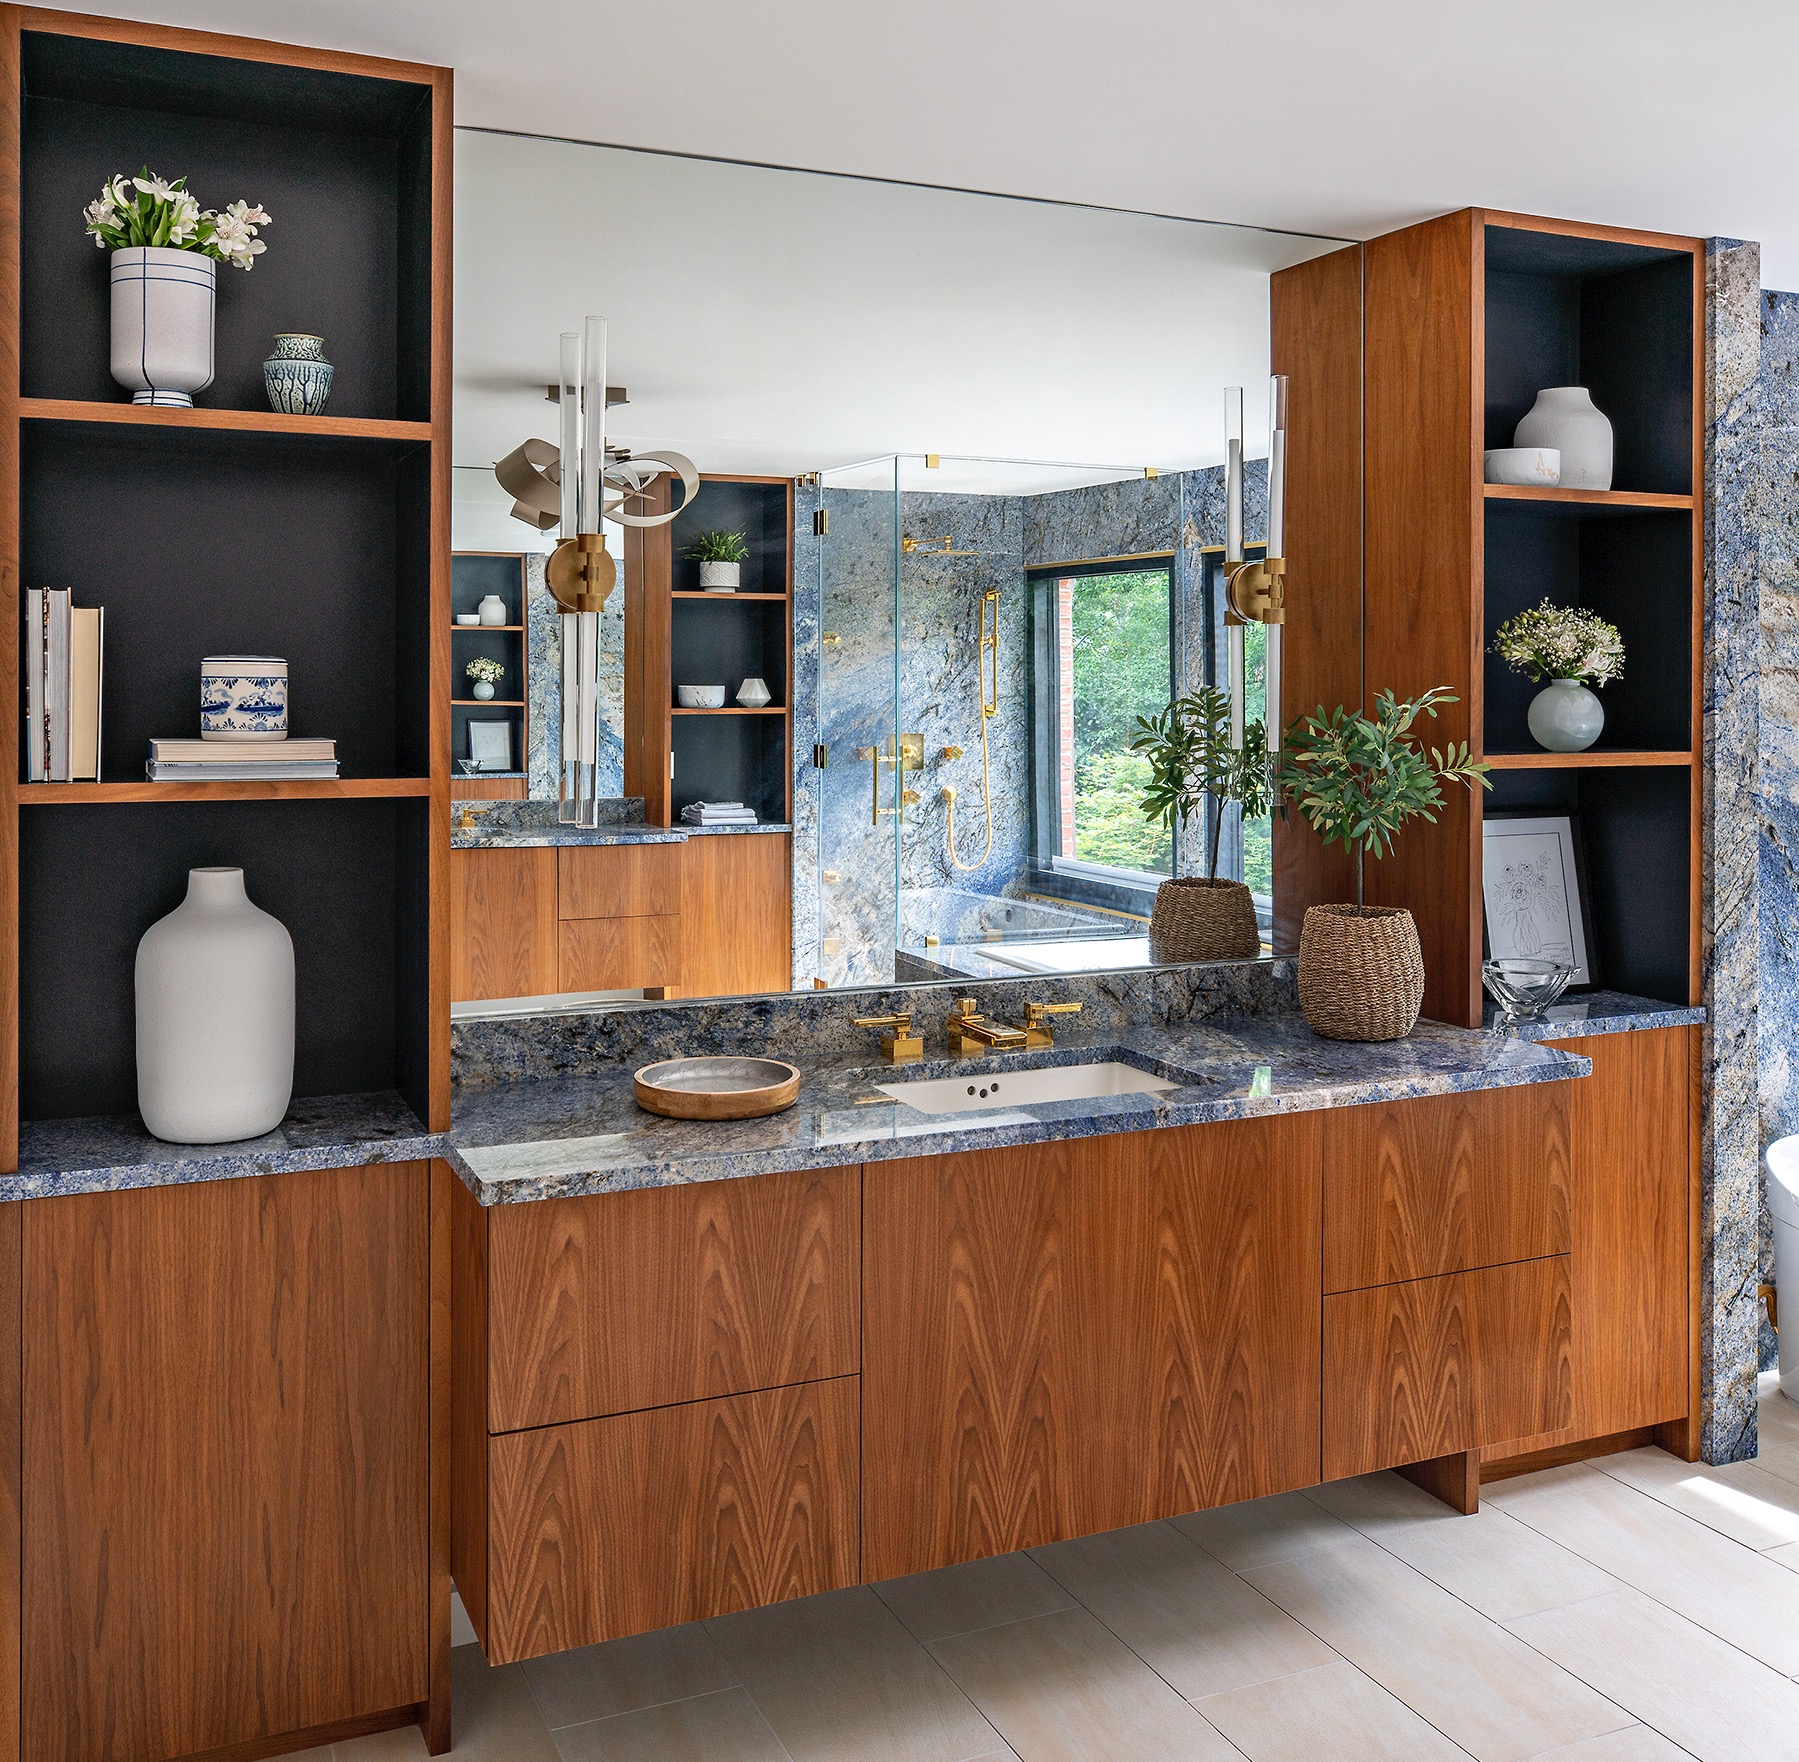 Check Out the Statement-Making Wood Vanities in These Bathrooms